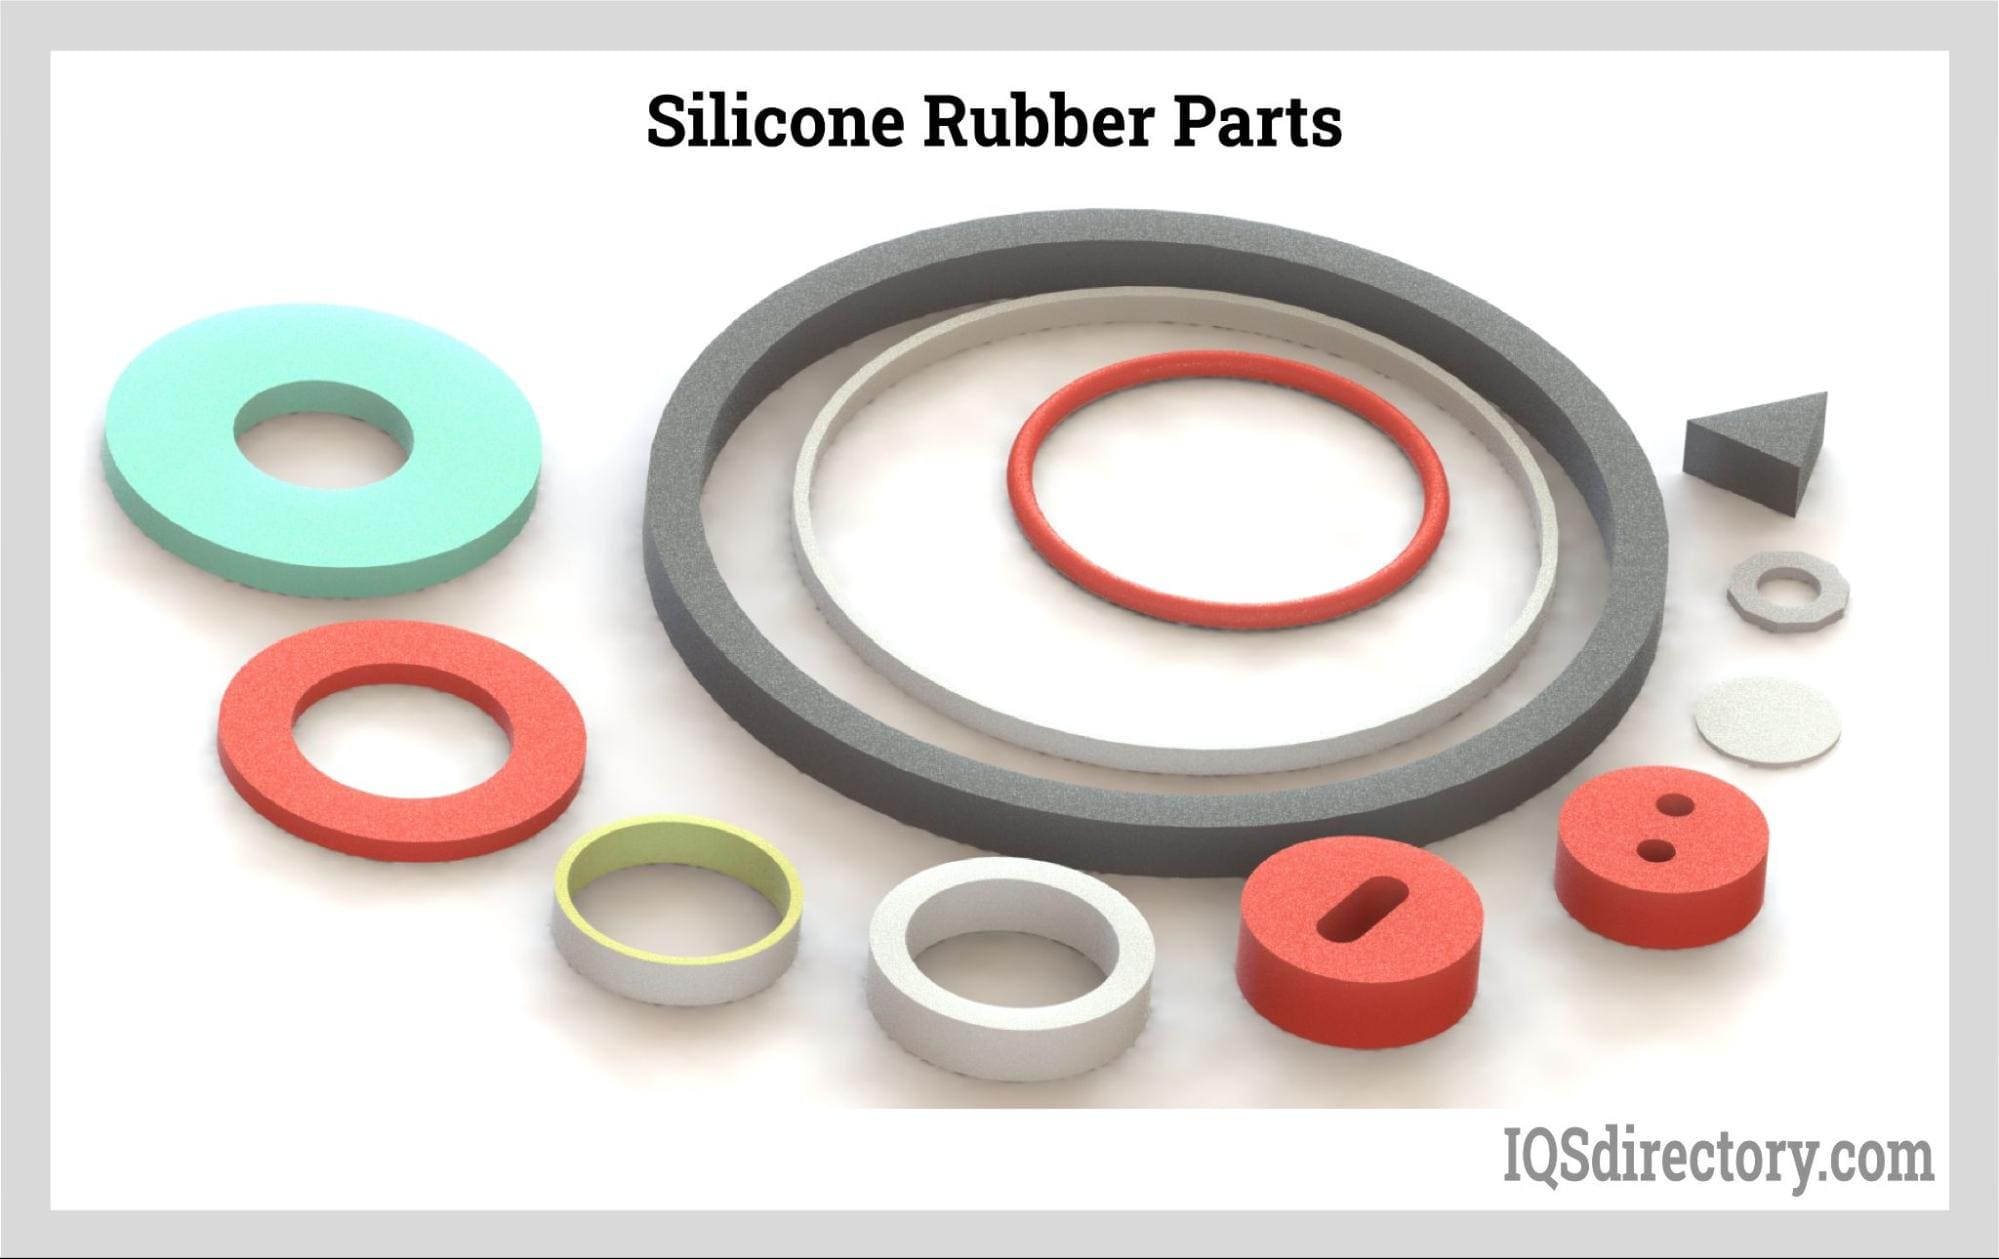 Silicone Vs EPDM: Choosing right elastomer for your rubber gasket